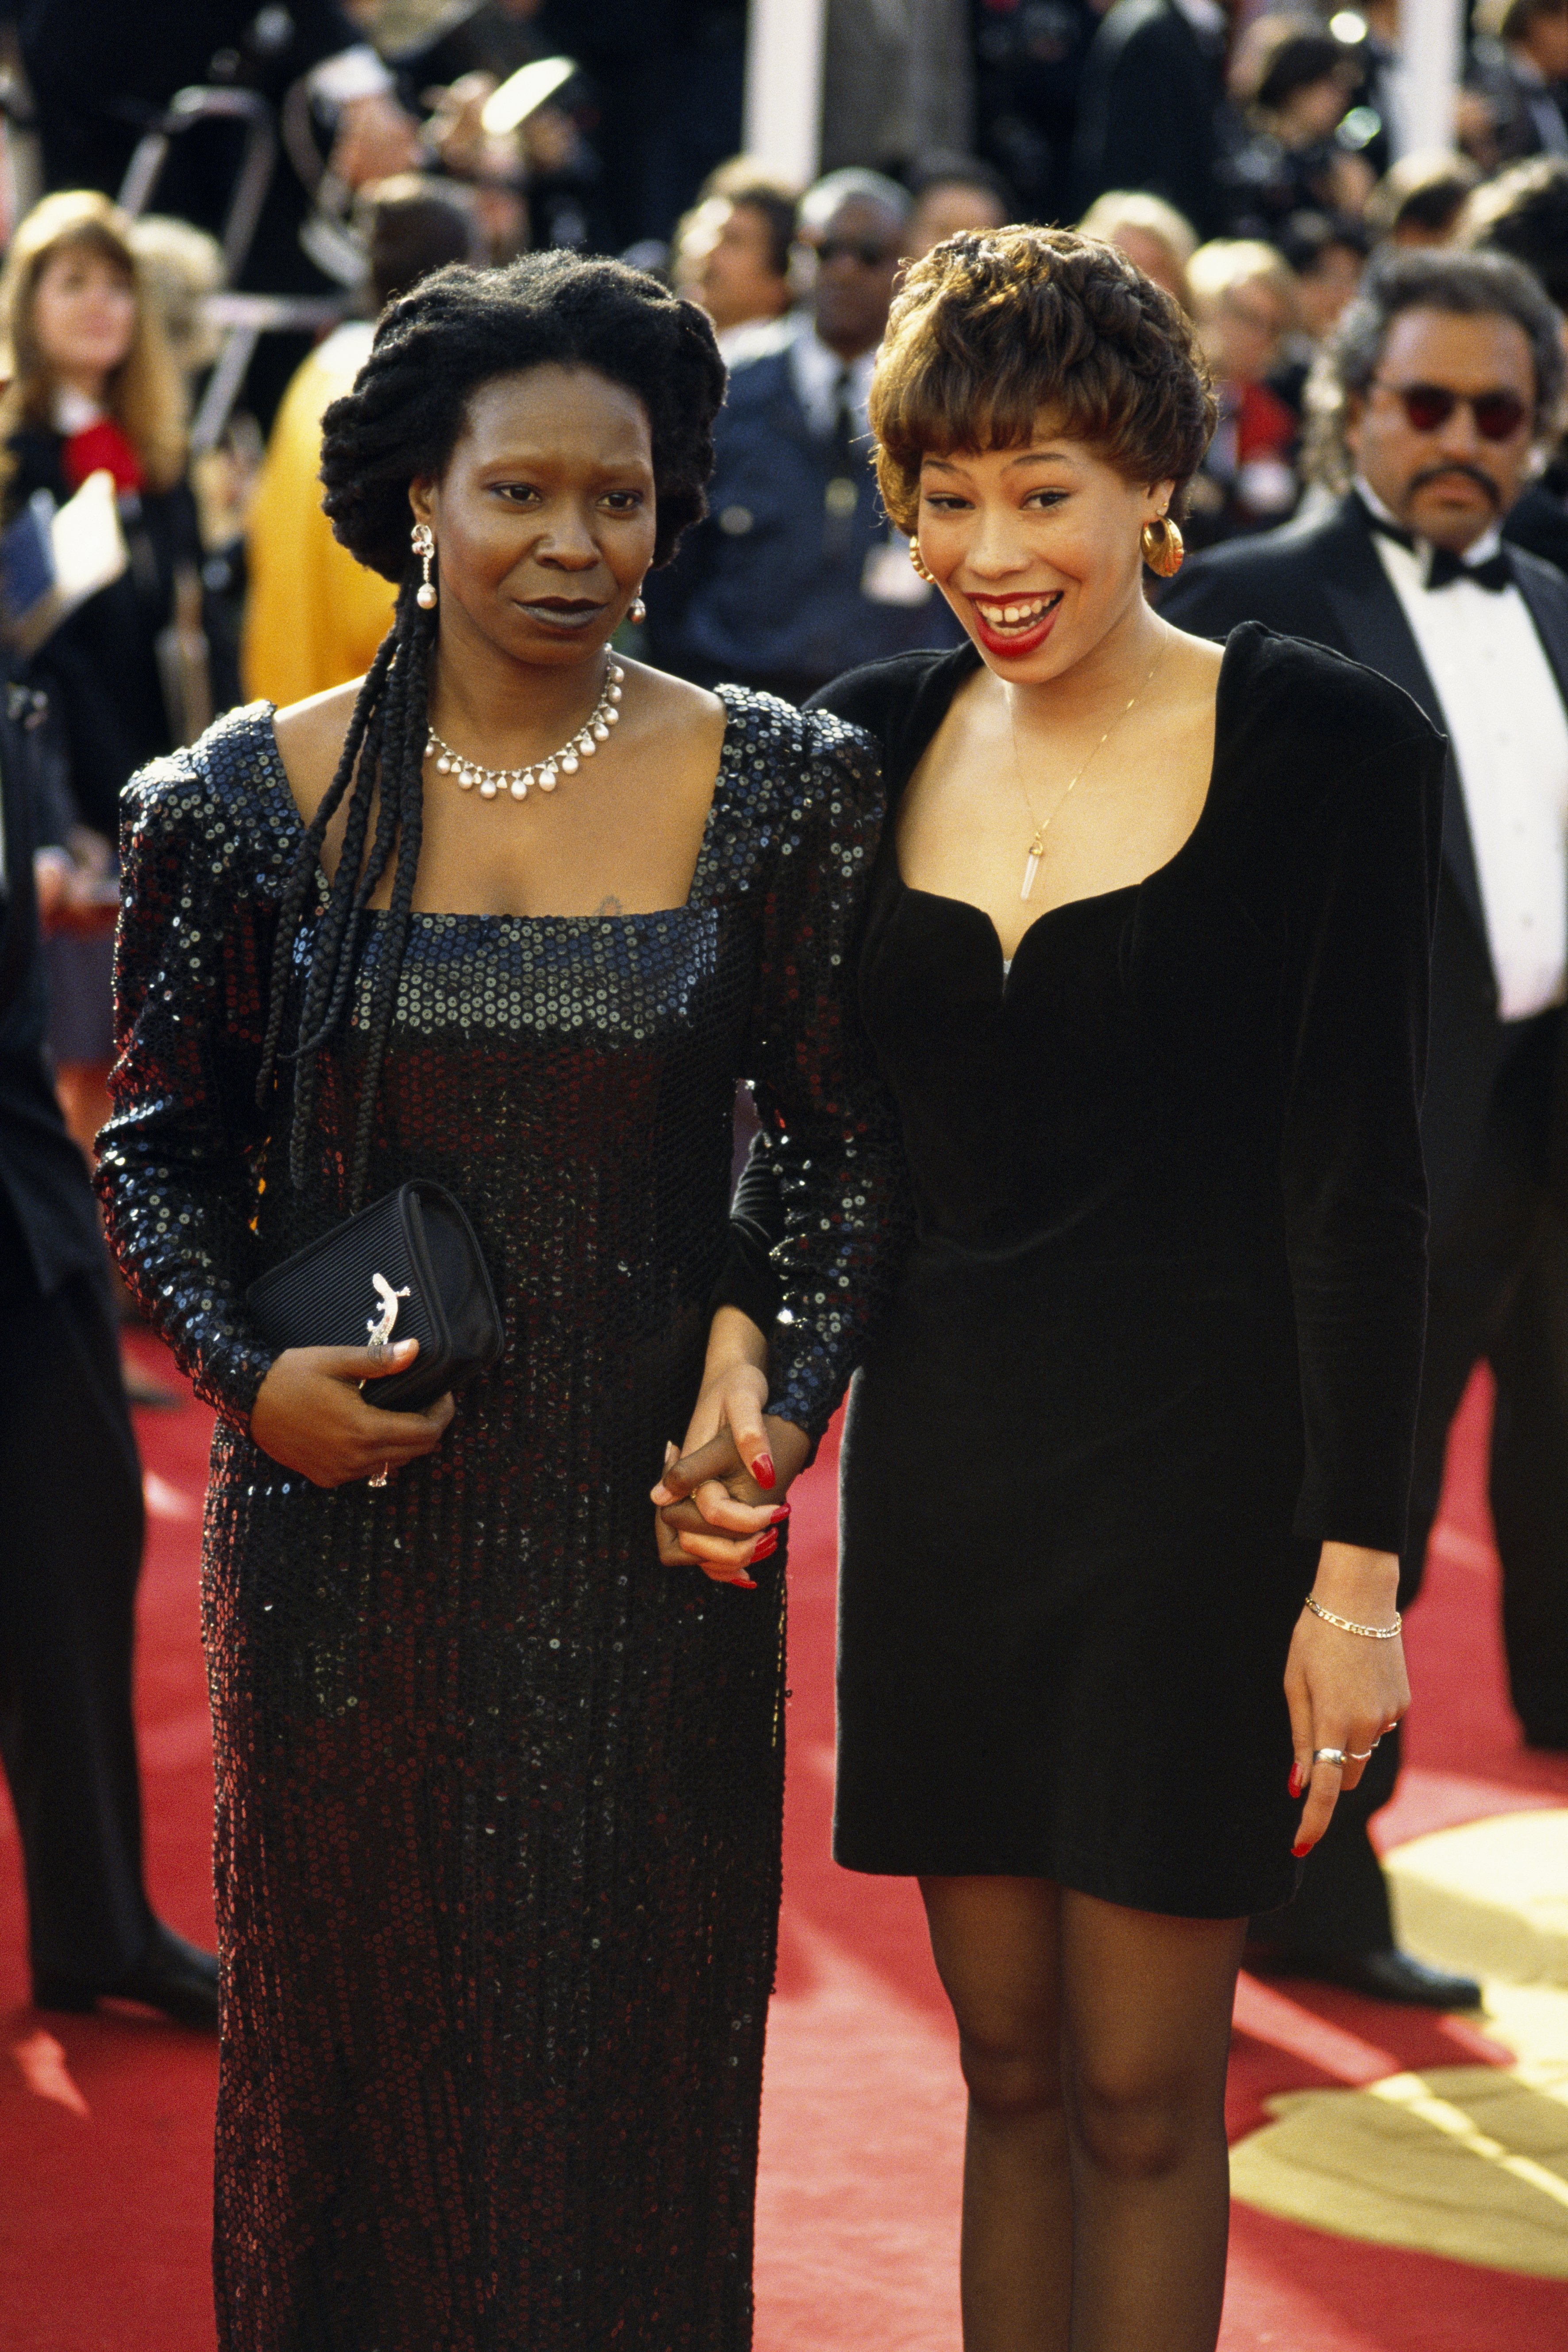 Whoopi Goldberg and her daughter Alex Martin attend the 63rd Academy Awards on January 1, 1991┃Source: Getty Images